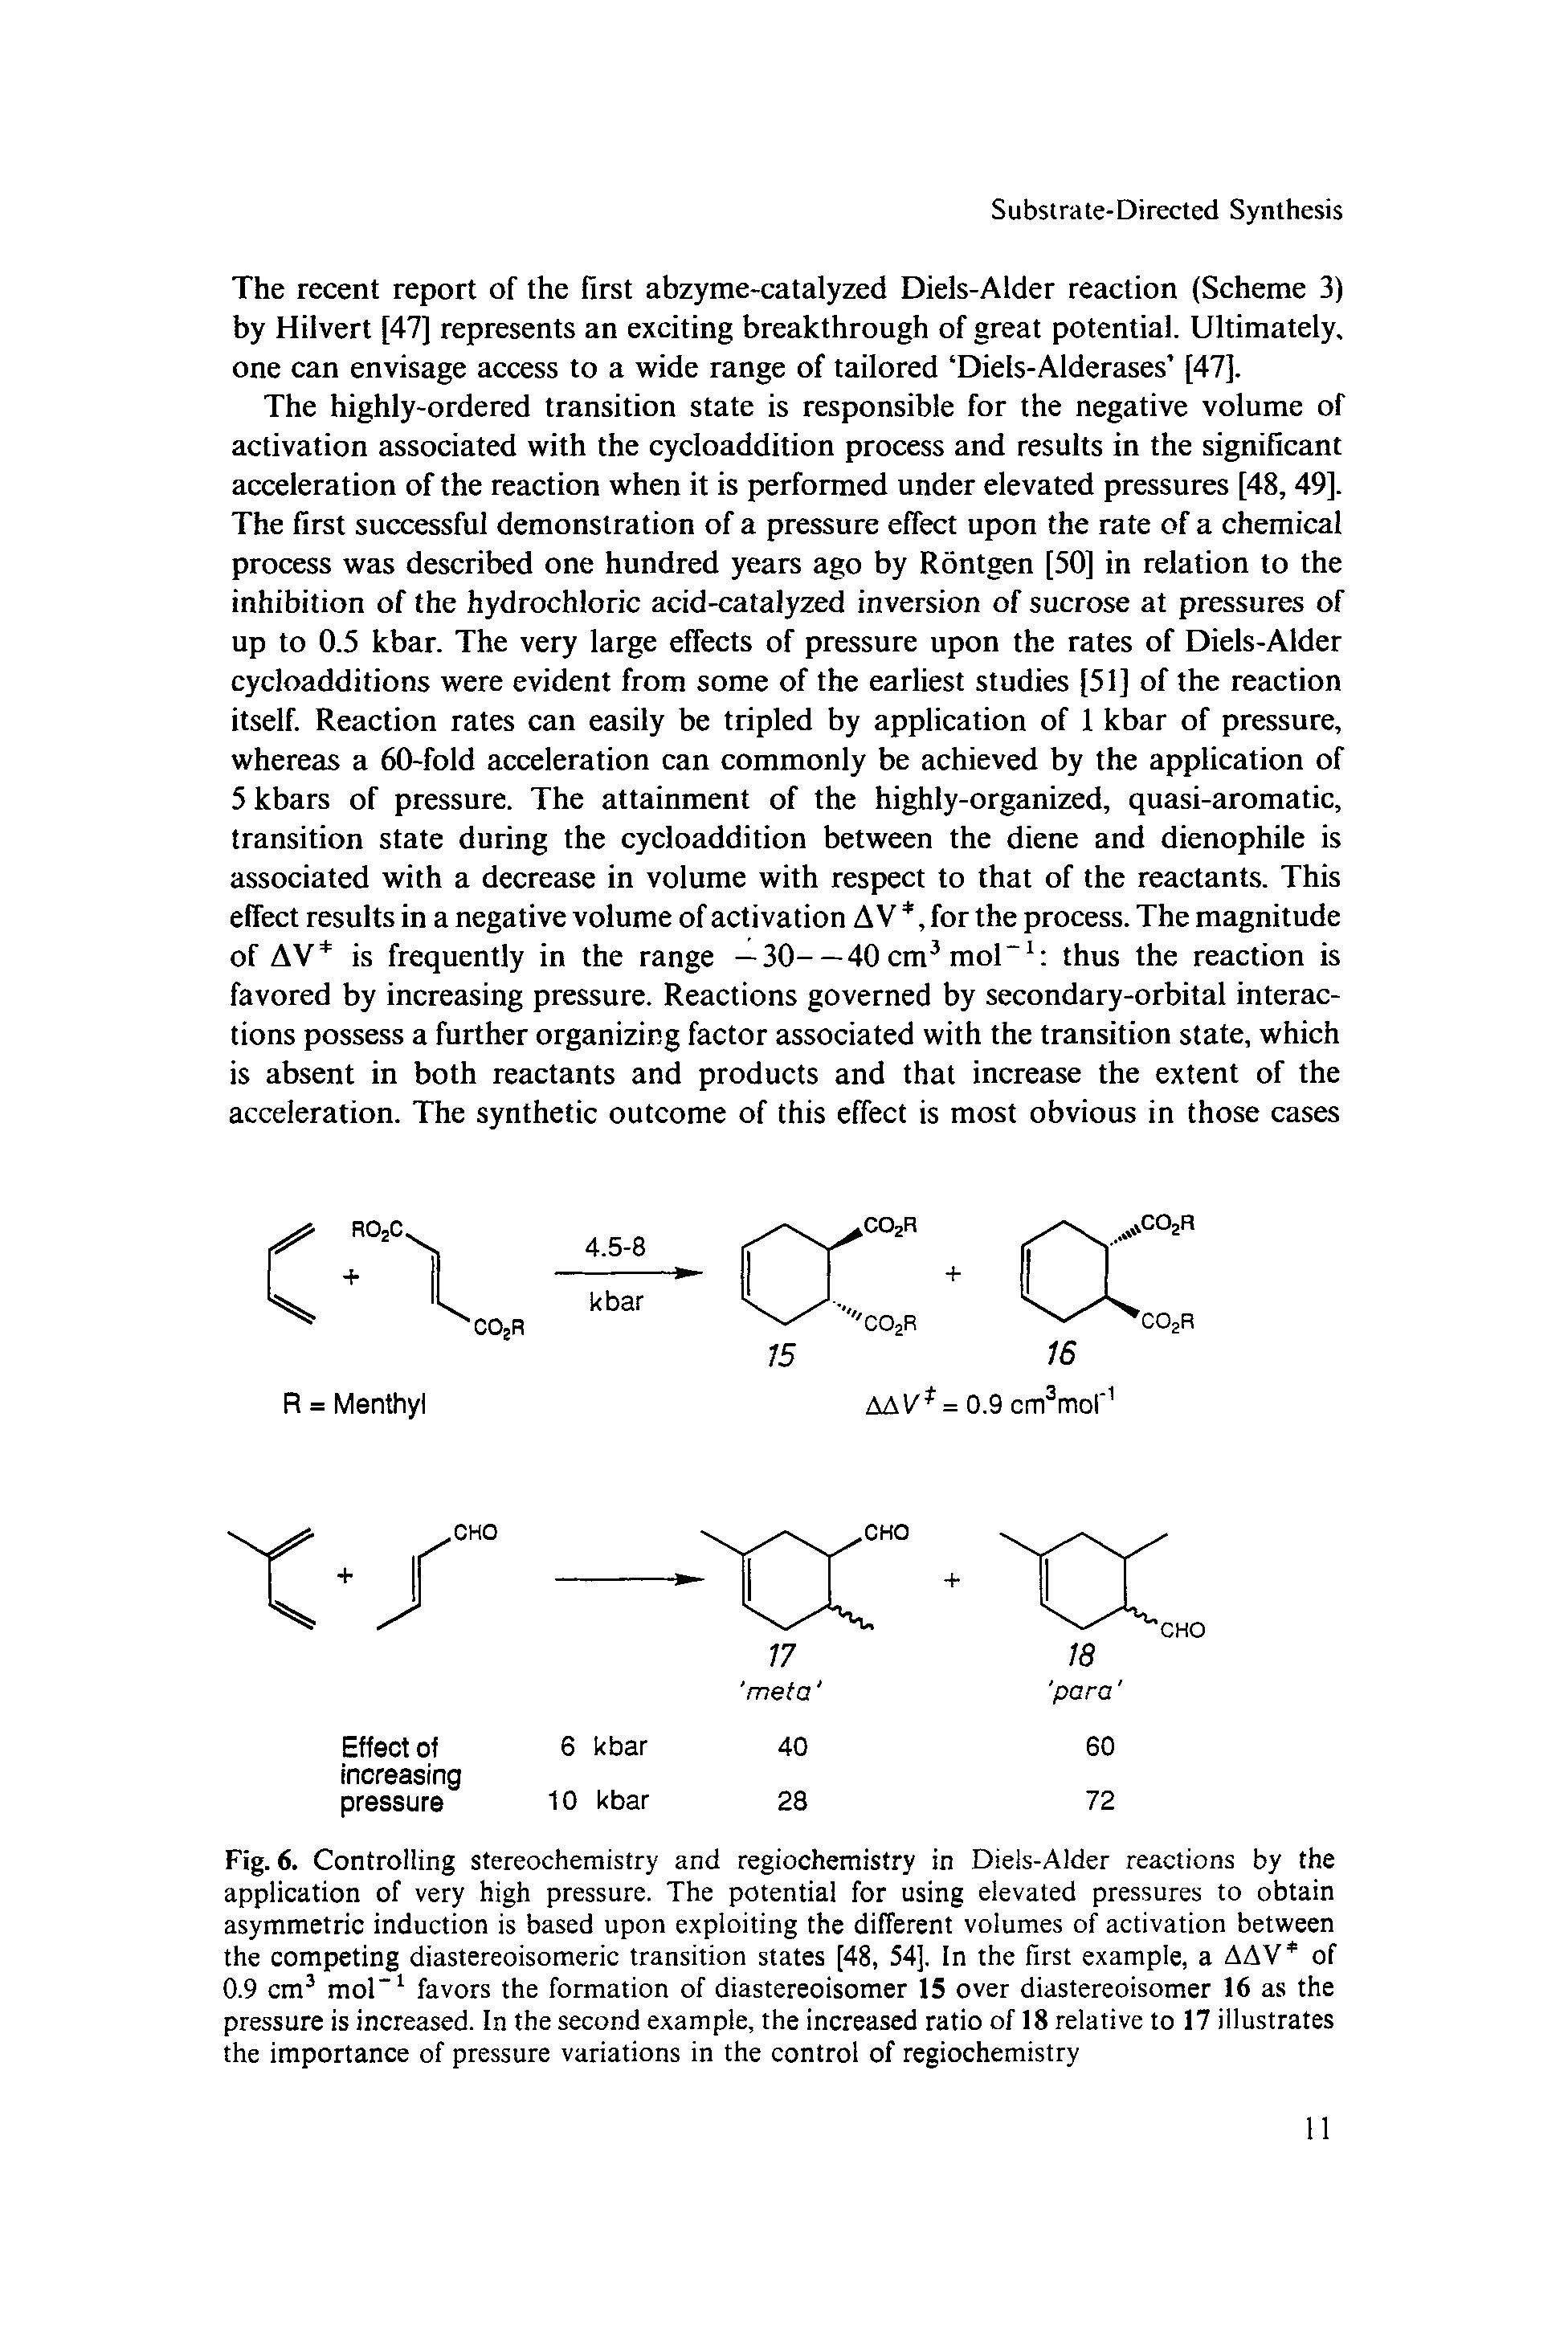 Fig. 6. Controlling stereochemistry and regiochemistry in Diels-Alder reactions by the application of very high pressure. The potential for using elevated pressures to obtain asymmetric induction is based upon exploiting the different volumes of activation between the competing diastereoisomeric transition states [48, 54]. In the first example, a AAV of 0.9 cm3 mol-1 favors the formation of diastereoisomer 15 over diastereoisomer 16 as the pressure is increased. In the second example, the increased ratio of 18 relative to 17 illustrates the importance of pressure variations in the control of regiochemistry...